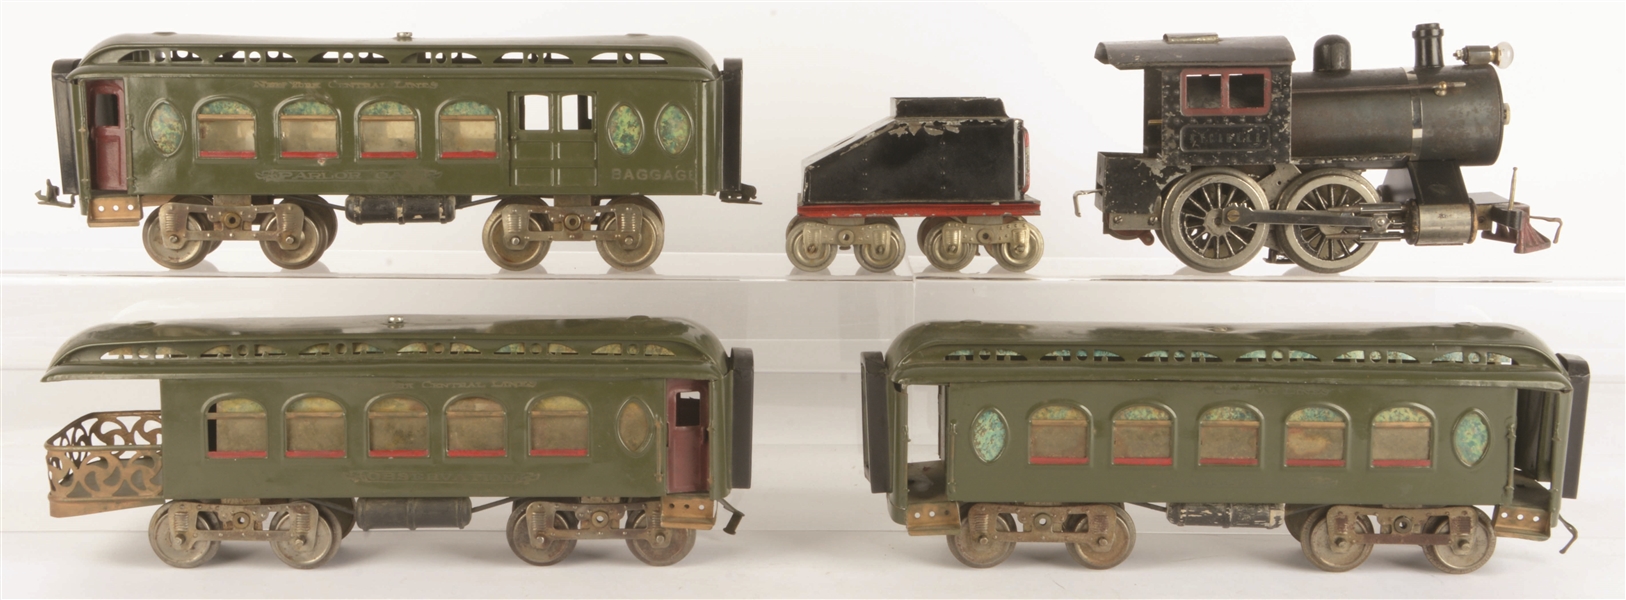 LIONEL NO. 5 WITH 3 PASSENGER CARS.